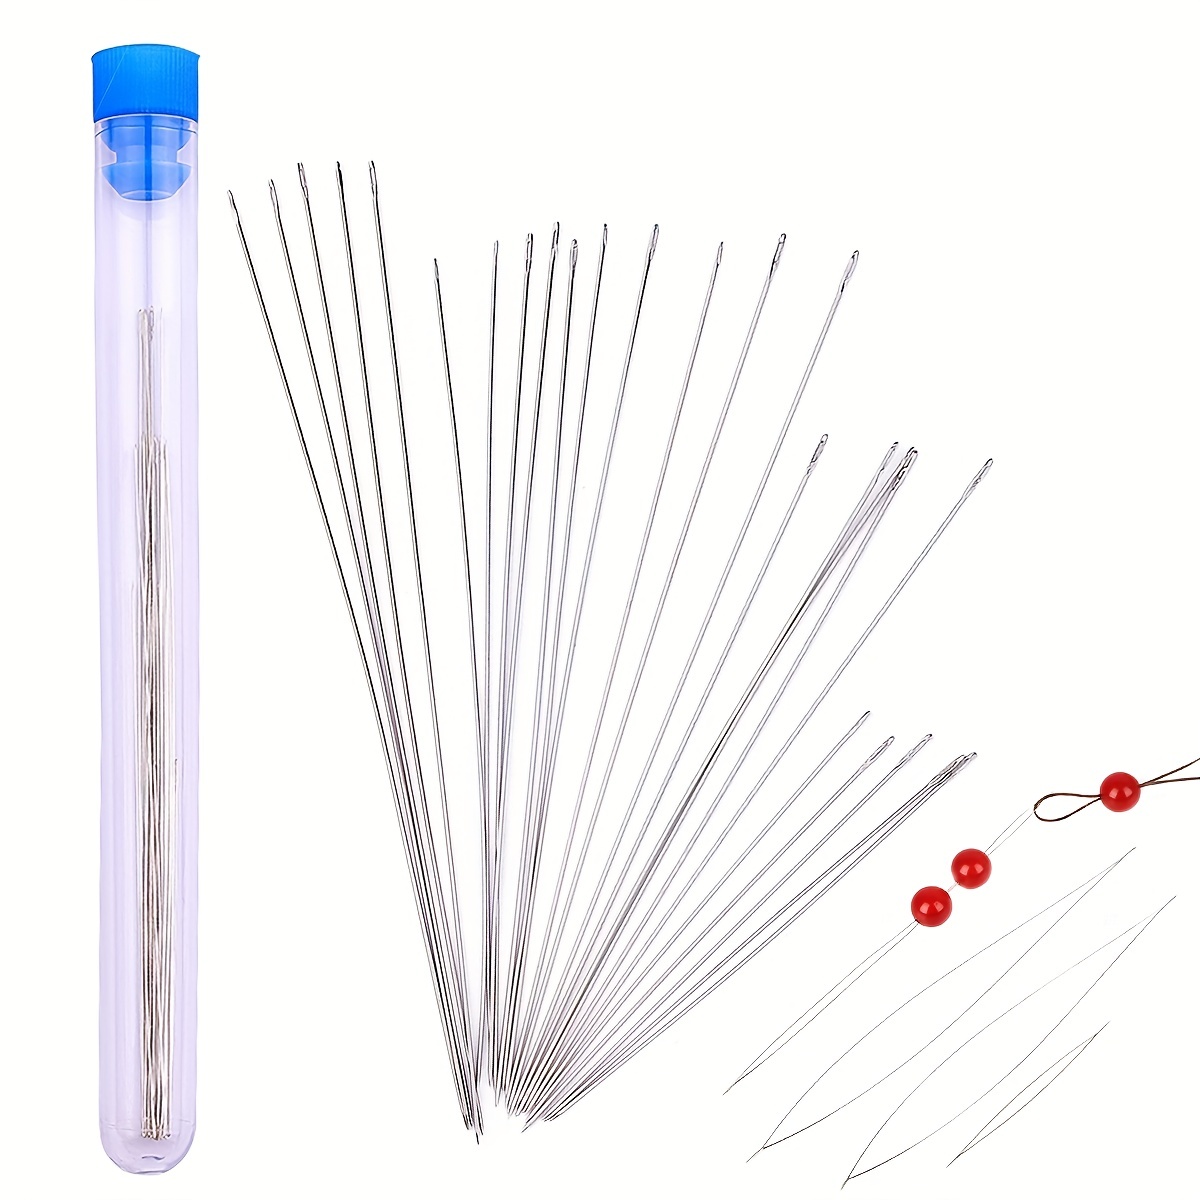 Bead Needle, 5 Sizes Stainless Steel Sewing Needles, Big Eye Beading  Needles, Collapsible Embroidery Beading Needle, for Craft and Jewellery  Making